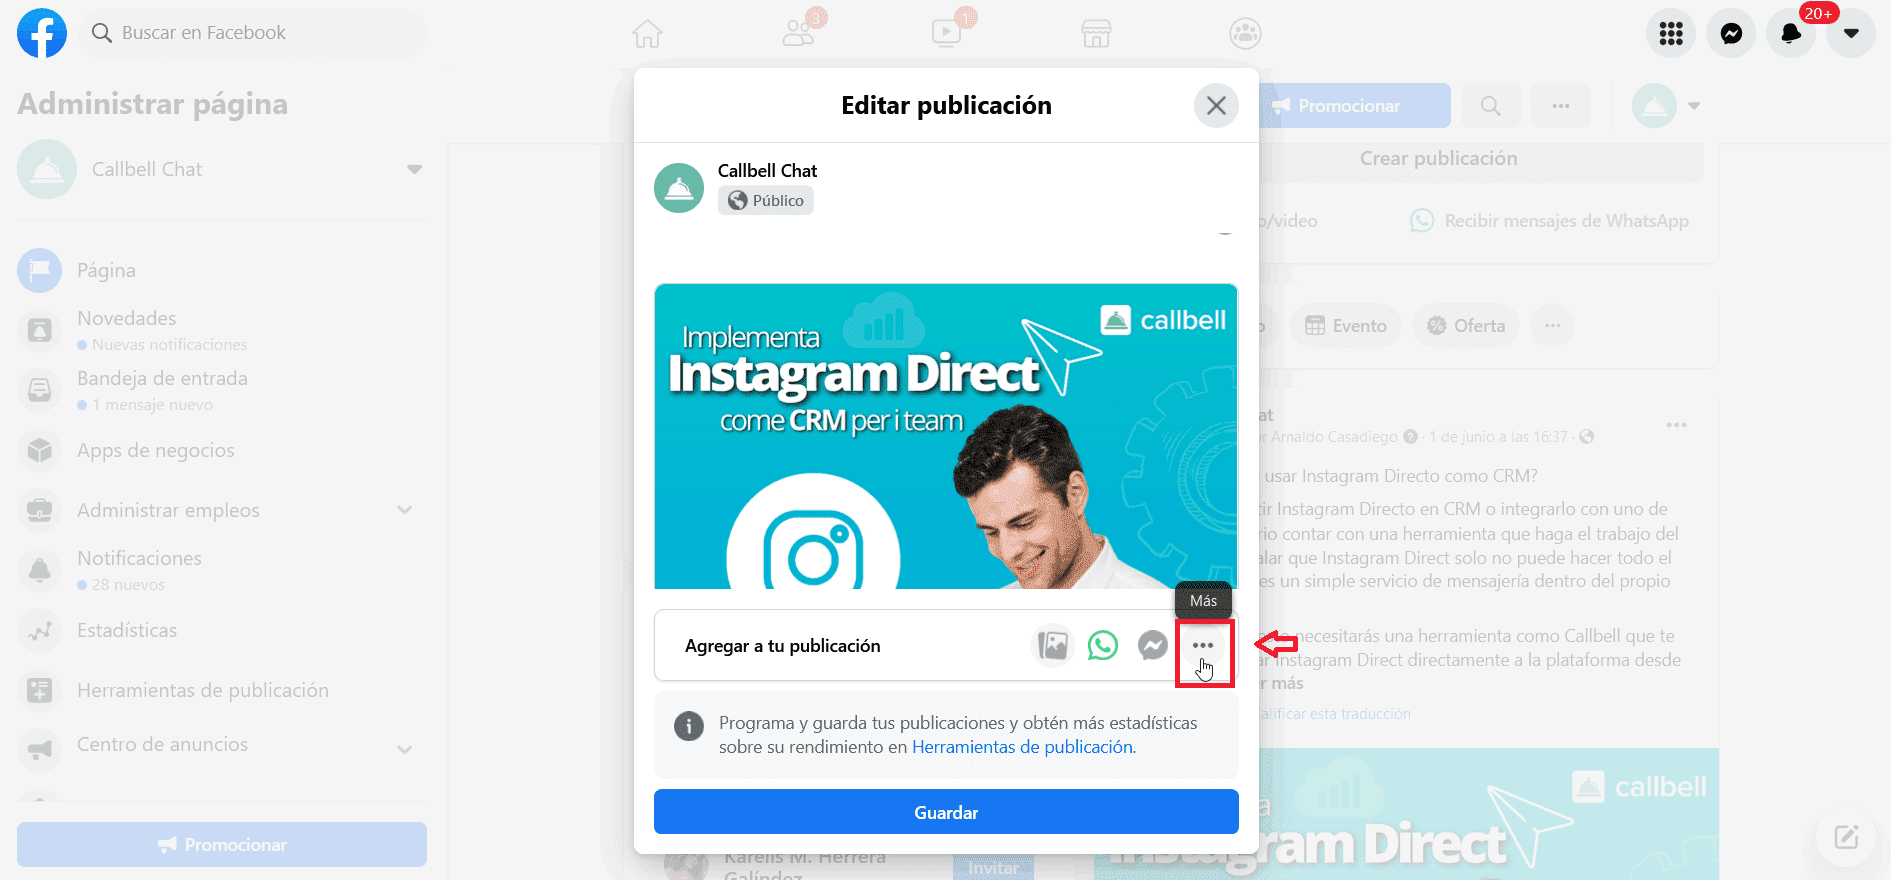 How to add the WhatsApp button to a Facebook's post?